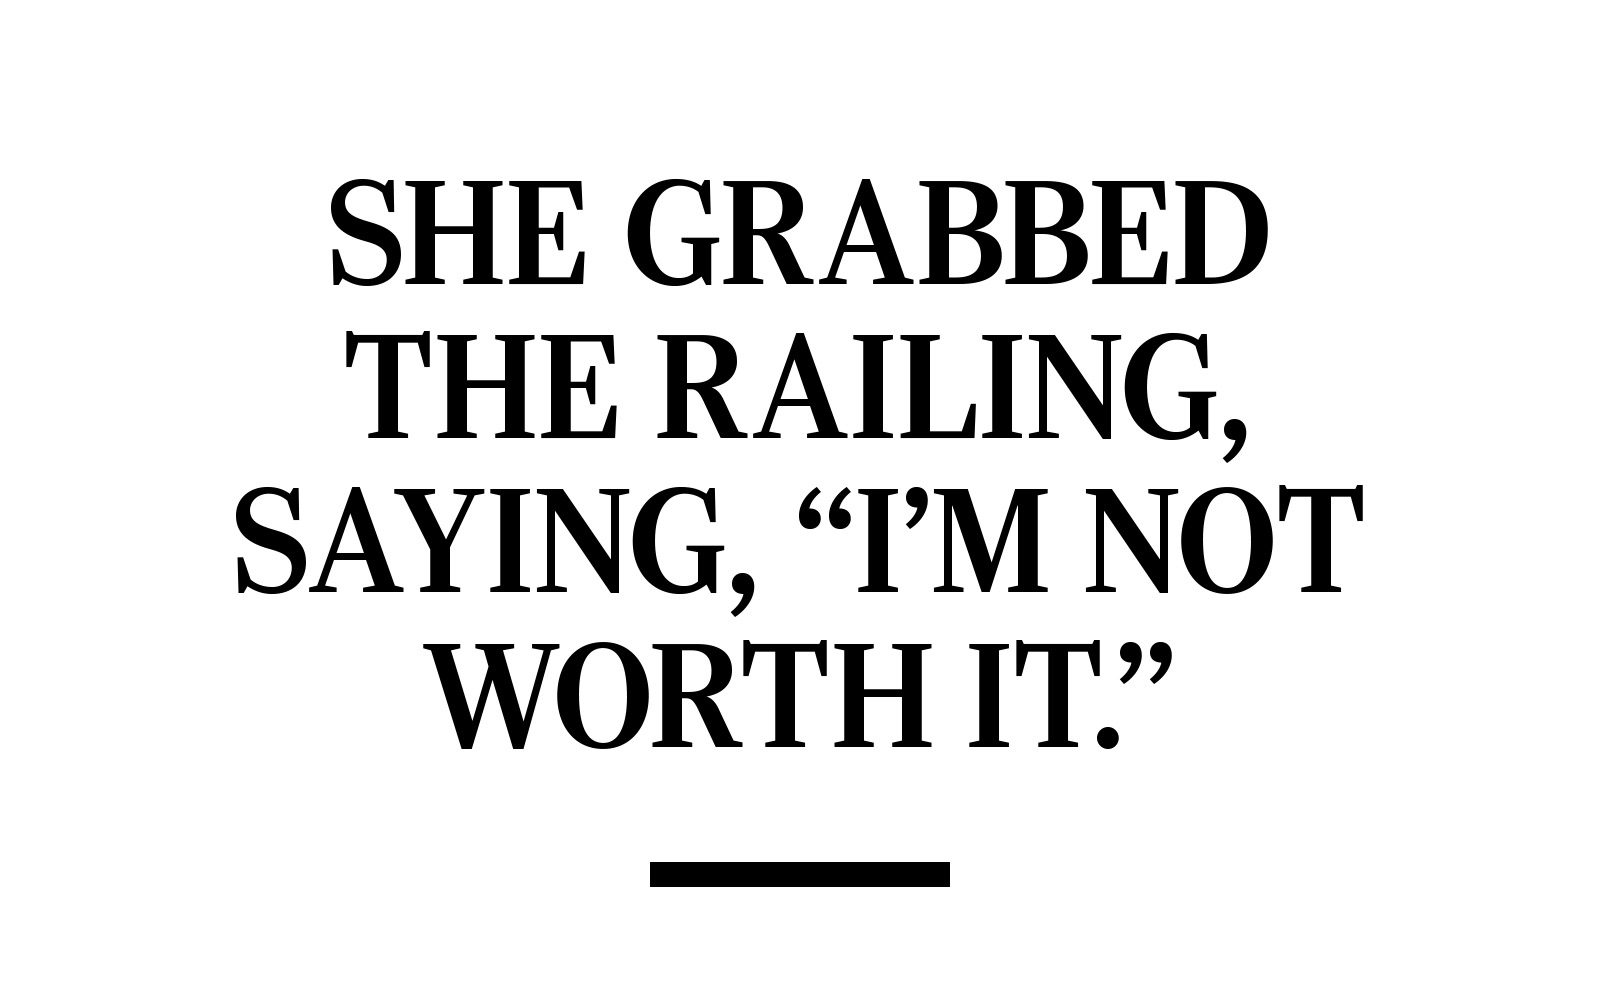 TEXT: She grabbed the railing, saying, "I'm not worth it."